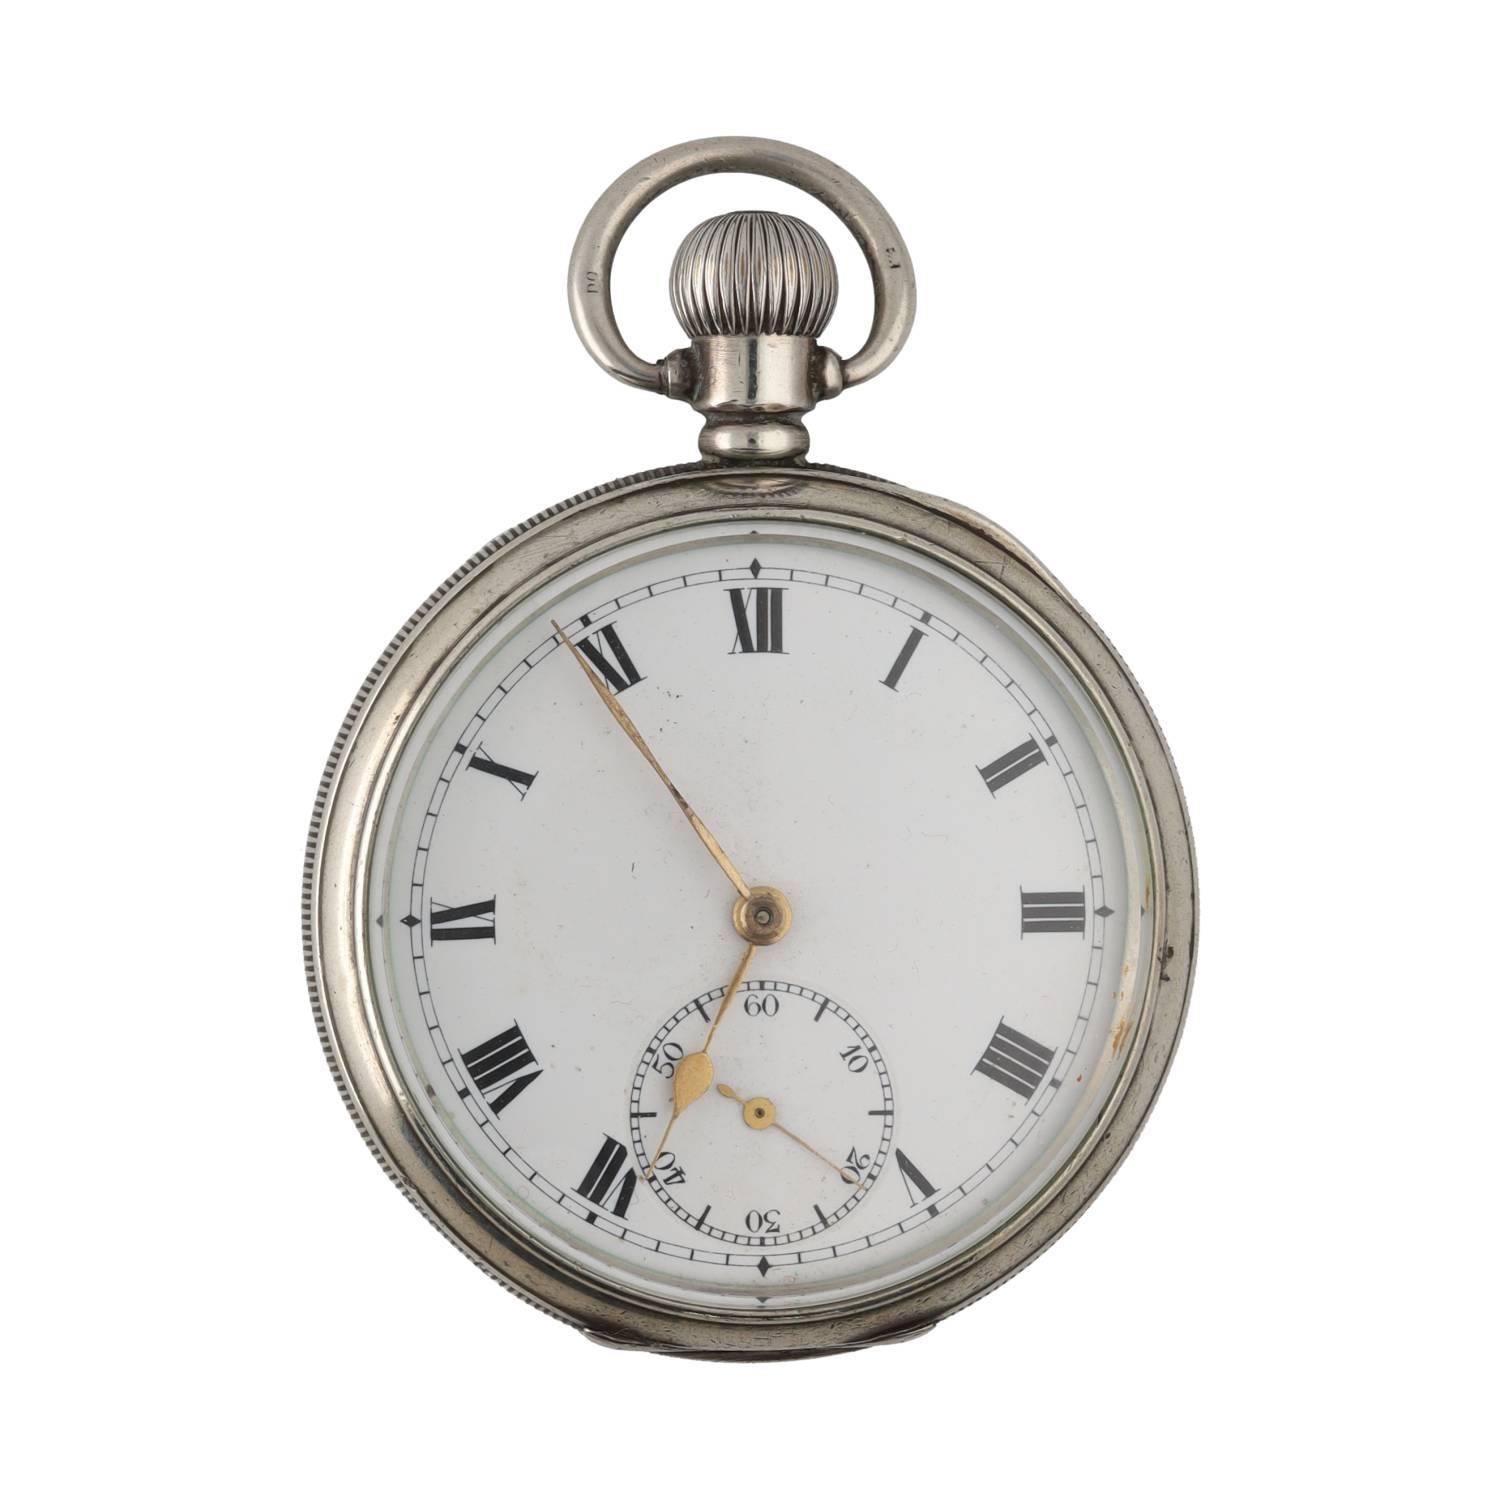 Dimier Freres & Co., Selezi  - silver lever pocket watch, Birmingham 1916, signed movement, hinged